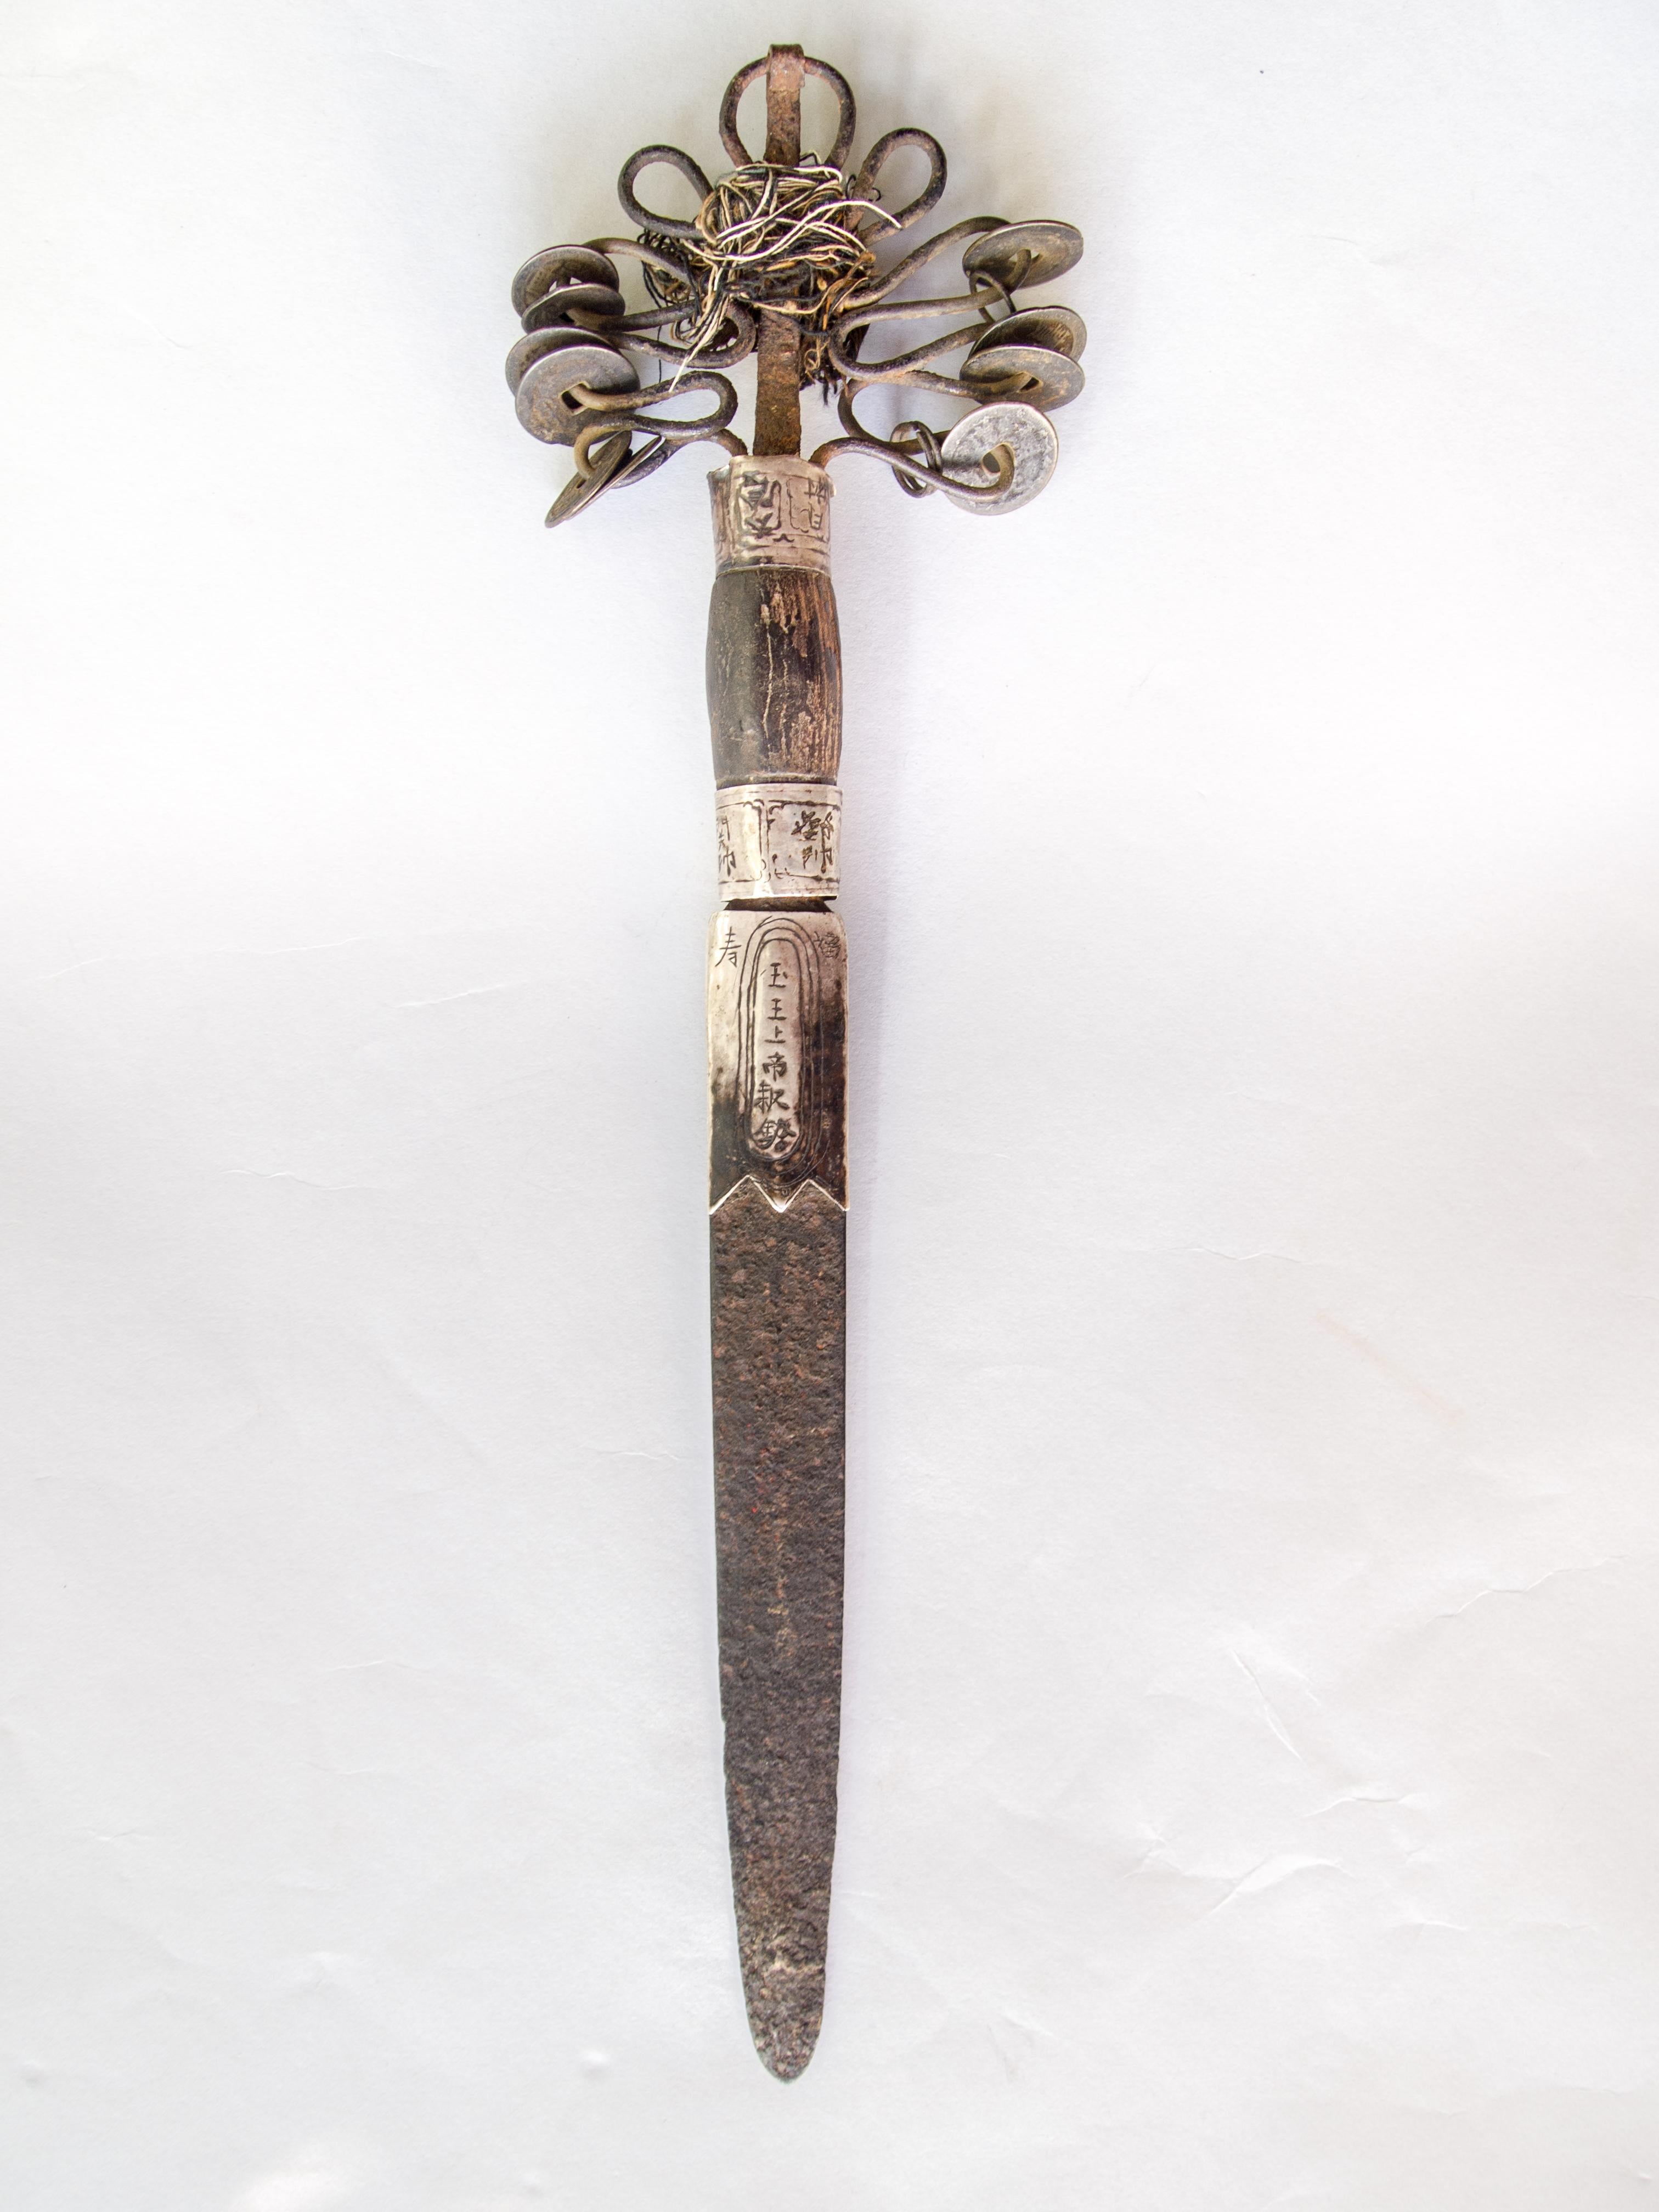 Yao Ritual Dagger or Dao. Iron with antique coins and silver banding inscribed with Chinese characters, Vietnam, early 20th century.
Used by a Yao priest or shaman in a ritual setting, a powerful aid when confronting the spirits on behalf of an